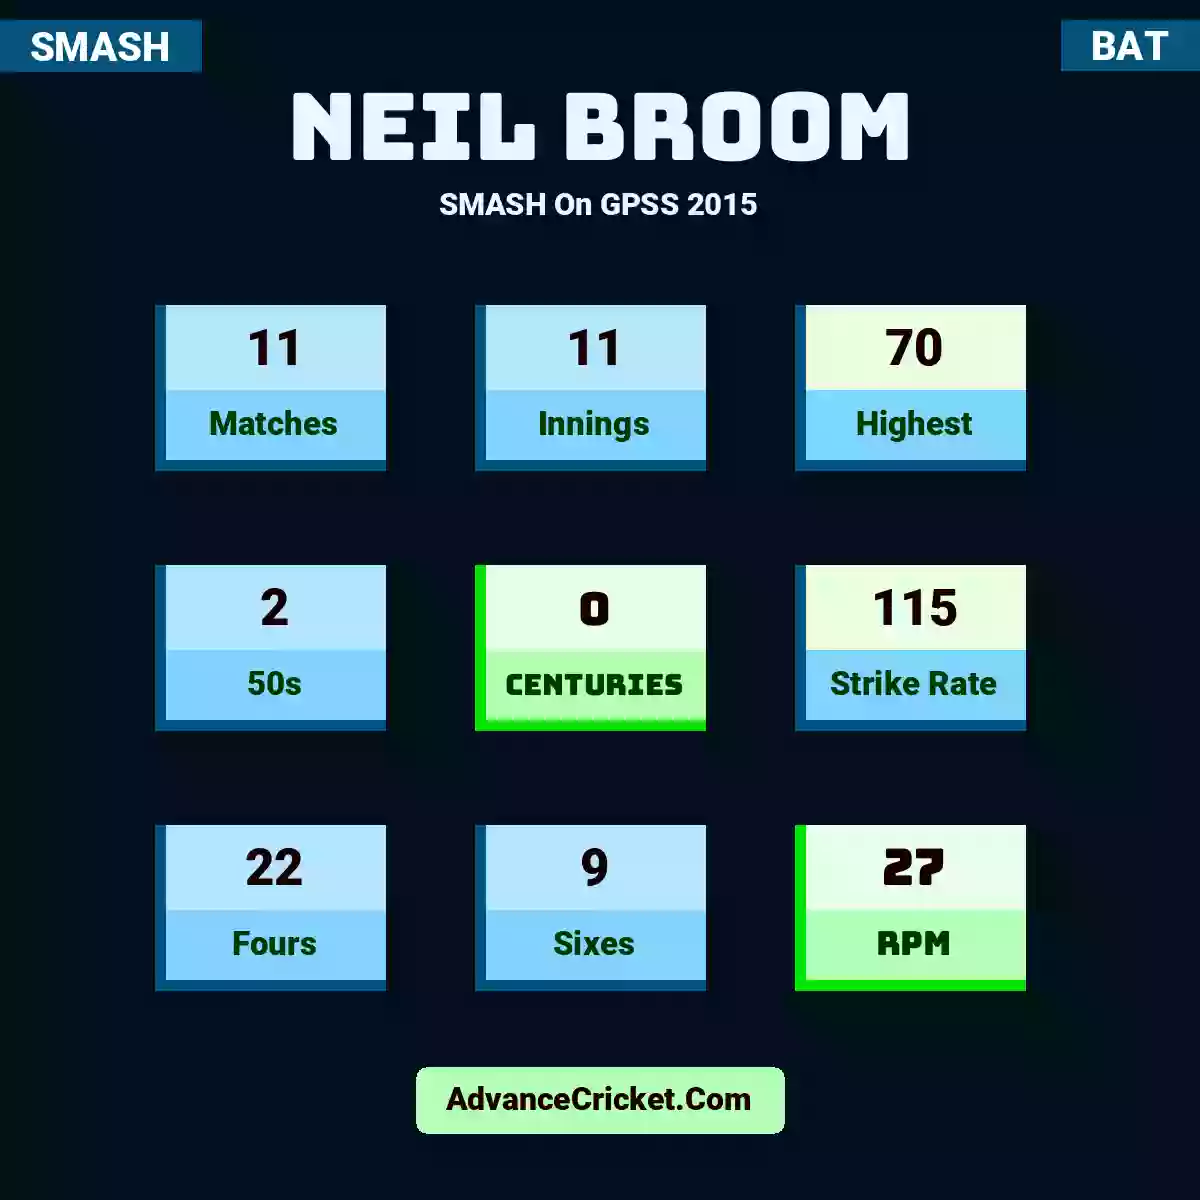 Neil Broom SMASH  On GPSS 2015, Neil Broom played 11 matches, scored 70 runs as highest, 2 half-centuries, and 0 centuries, with a strike rate of 115. N.Broom hit 22 fours and 9 sixes, with an RPM of 27.